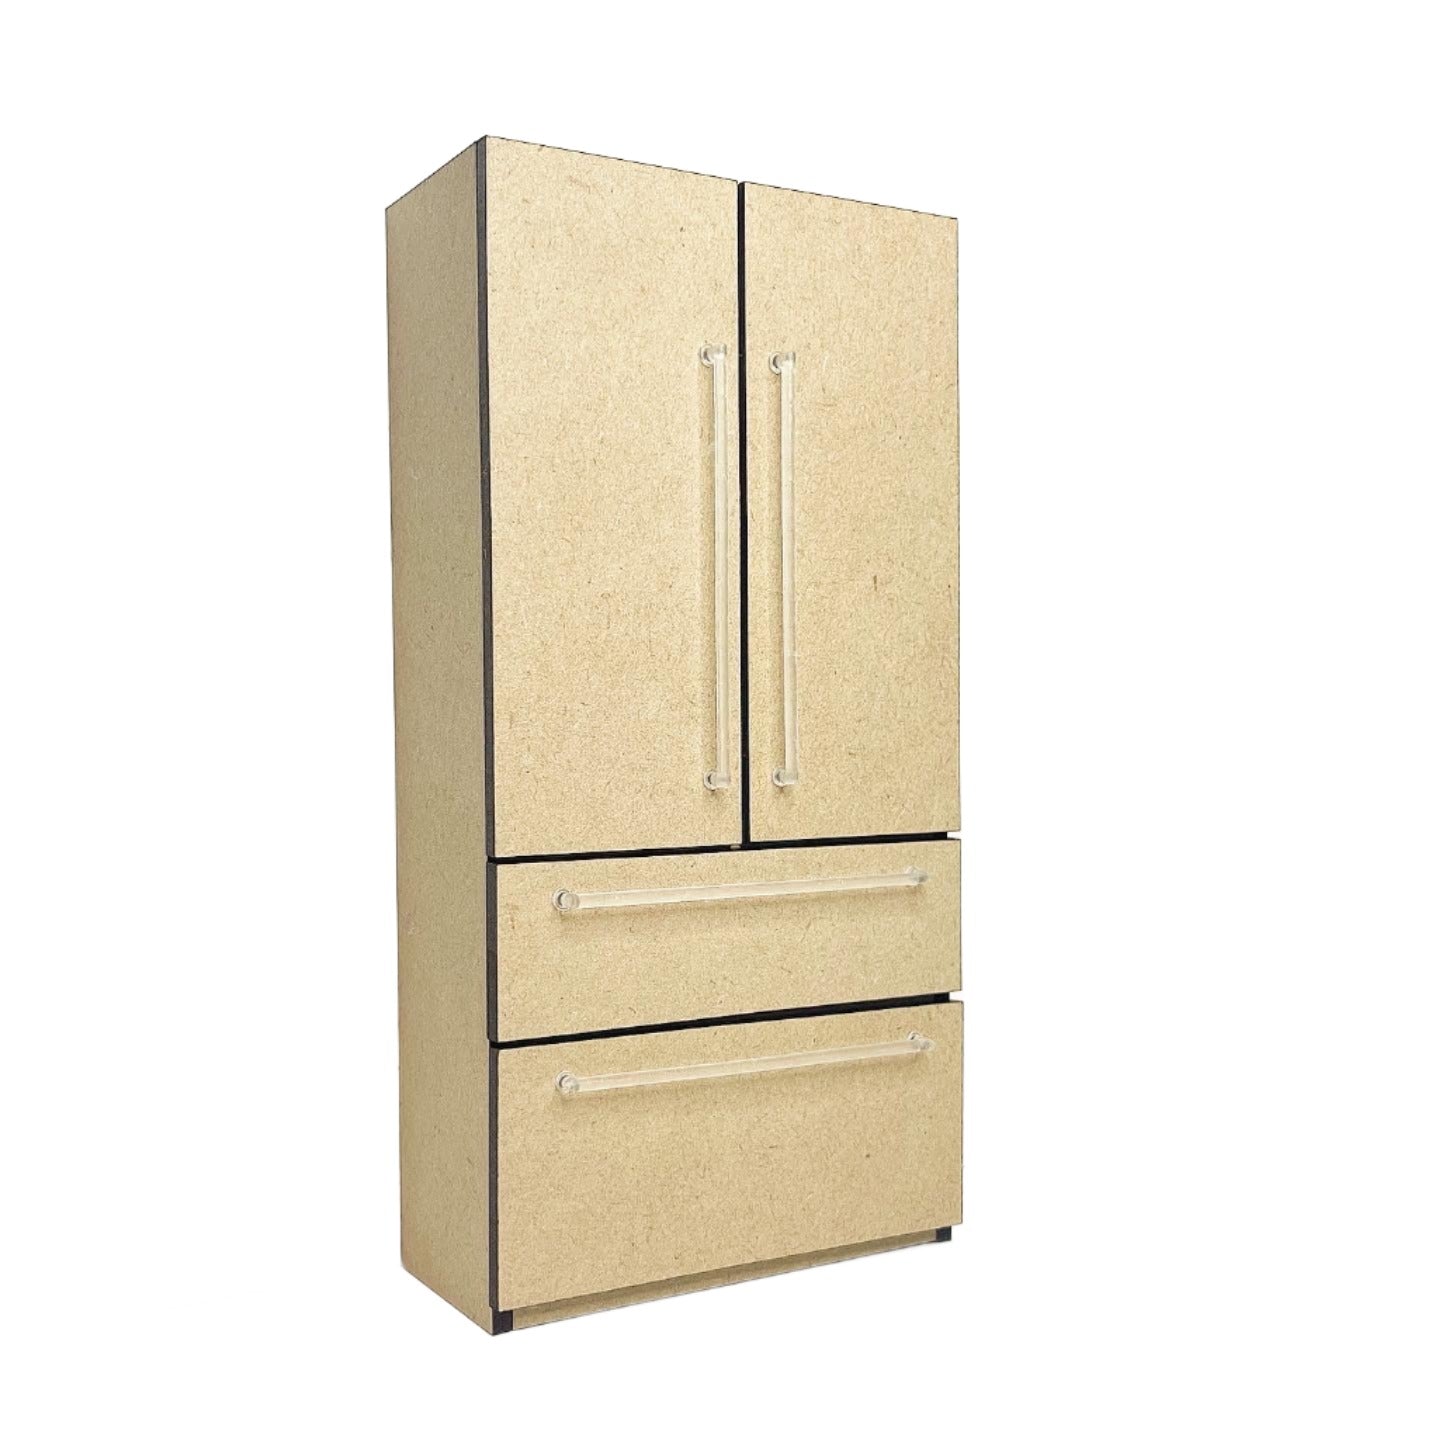 Modern Fridge with Two Drawers